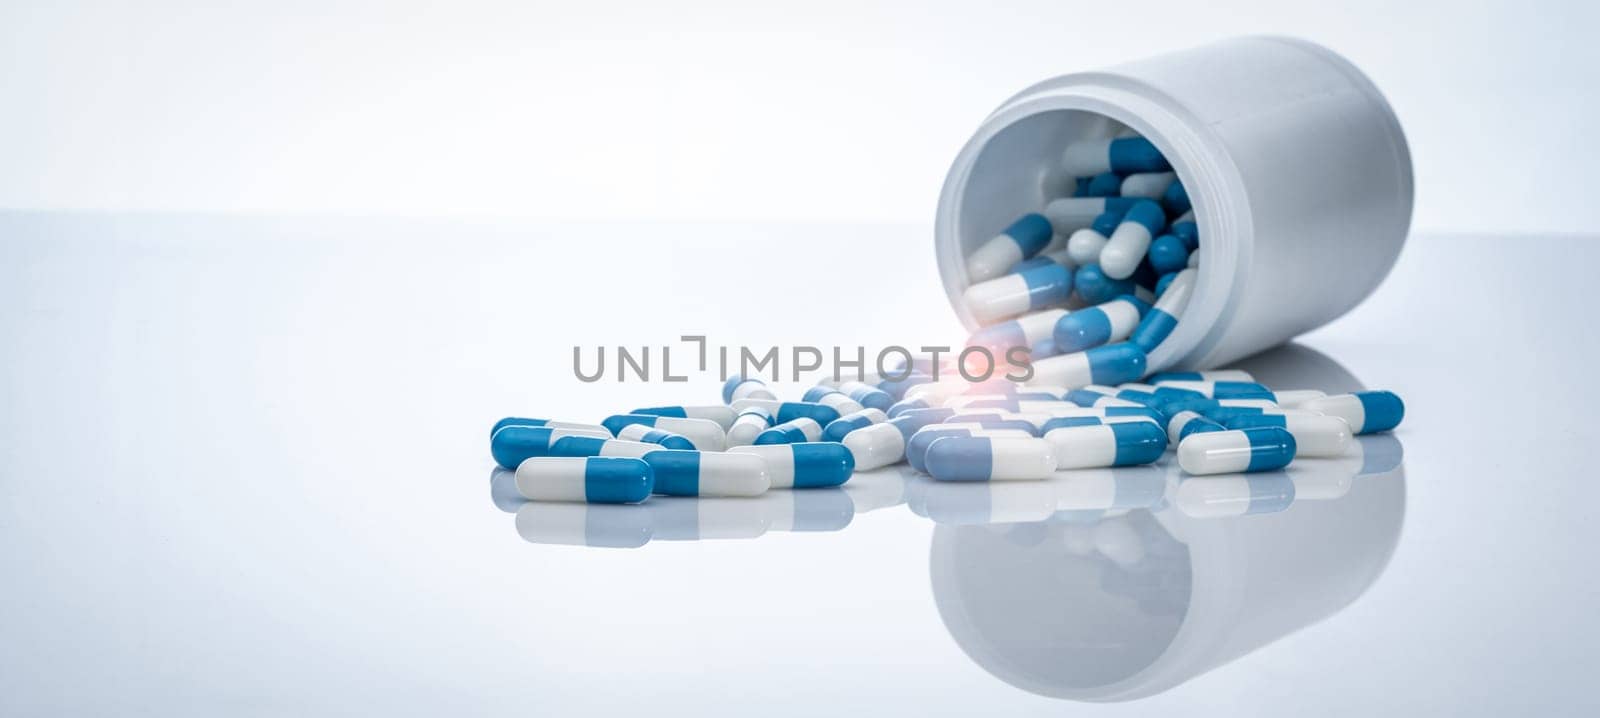 Blue-white antibiotic capsule pills spread out of plastic drug bottles. Antibiotic drug resistance. Prescription drugs. Healthcare and medicine. Pharmaceutical industry. Pharmacy product. Medication. by Fahroni